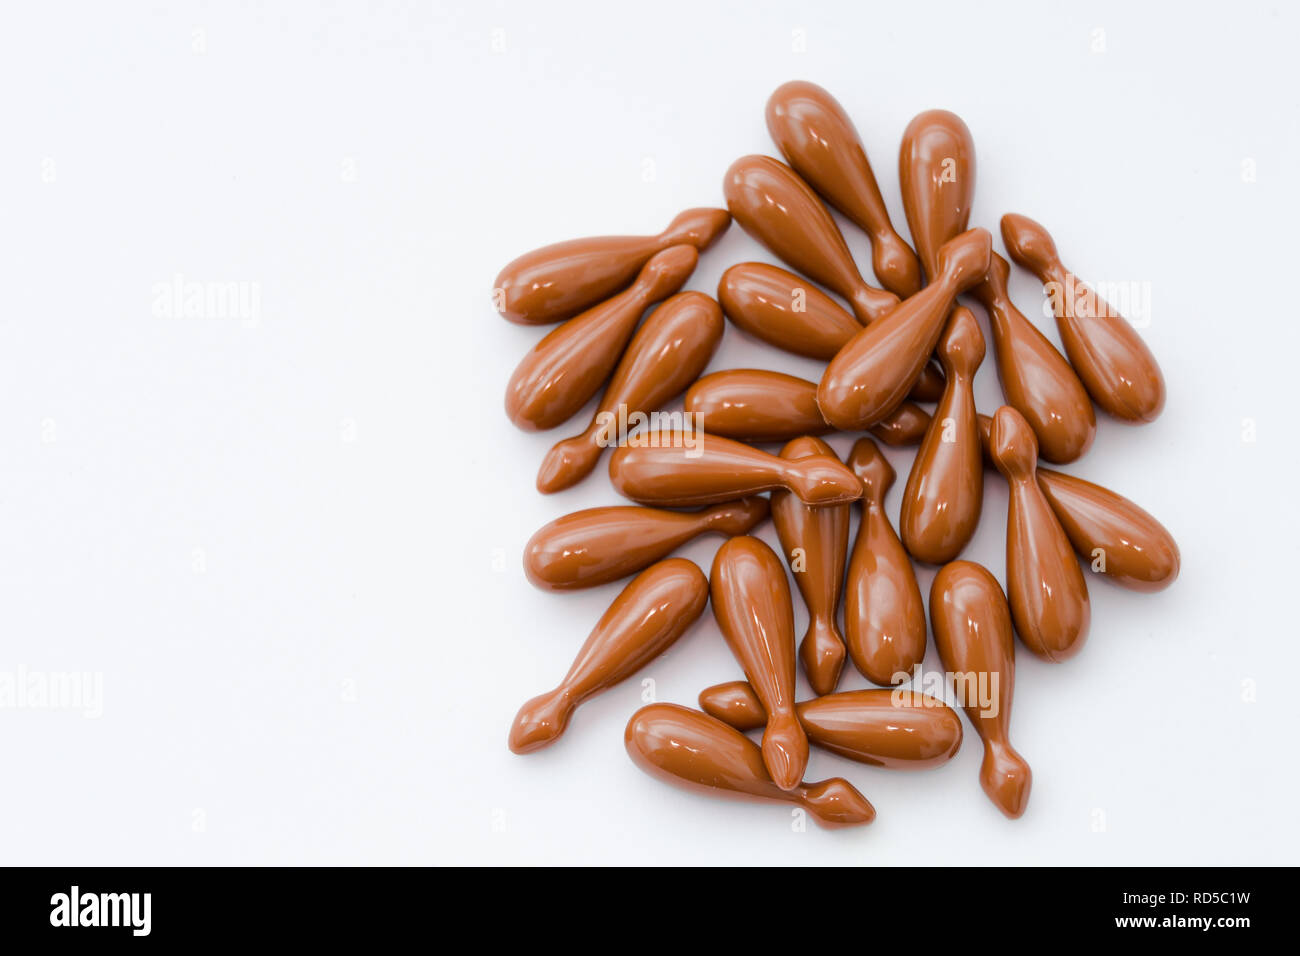 Capsules for immunity support on white surface Stock Photo